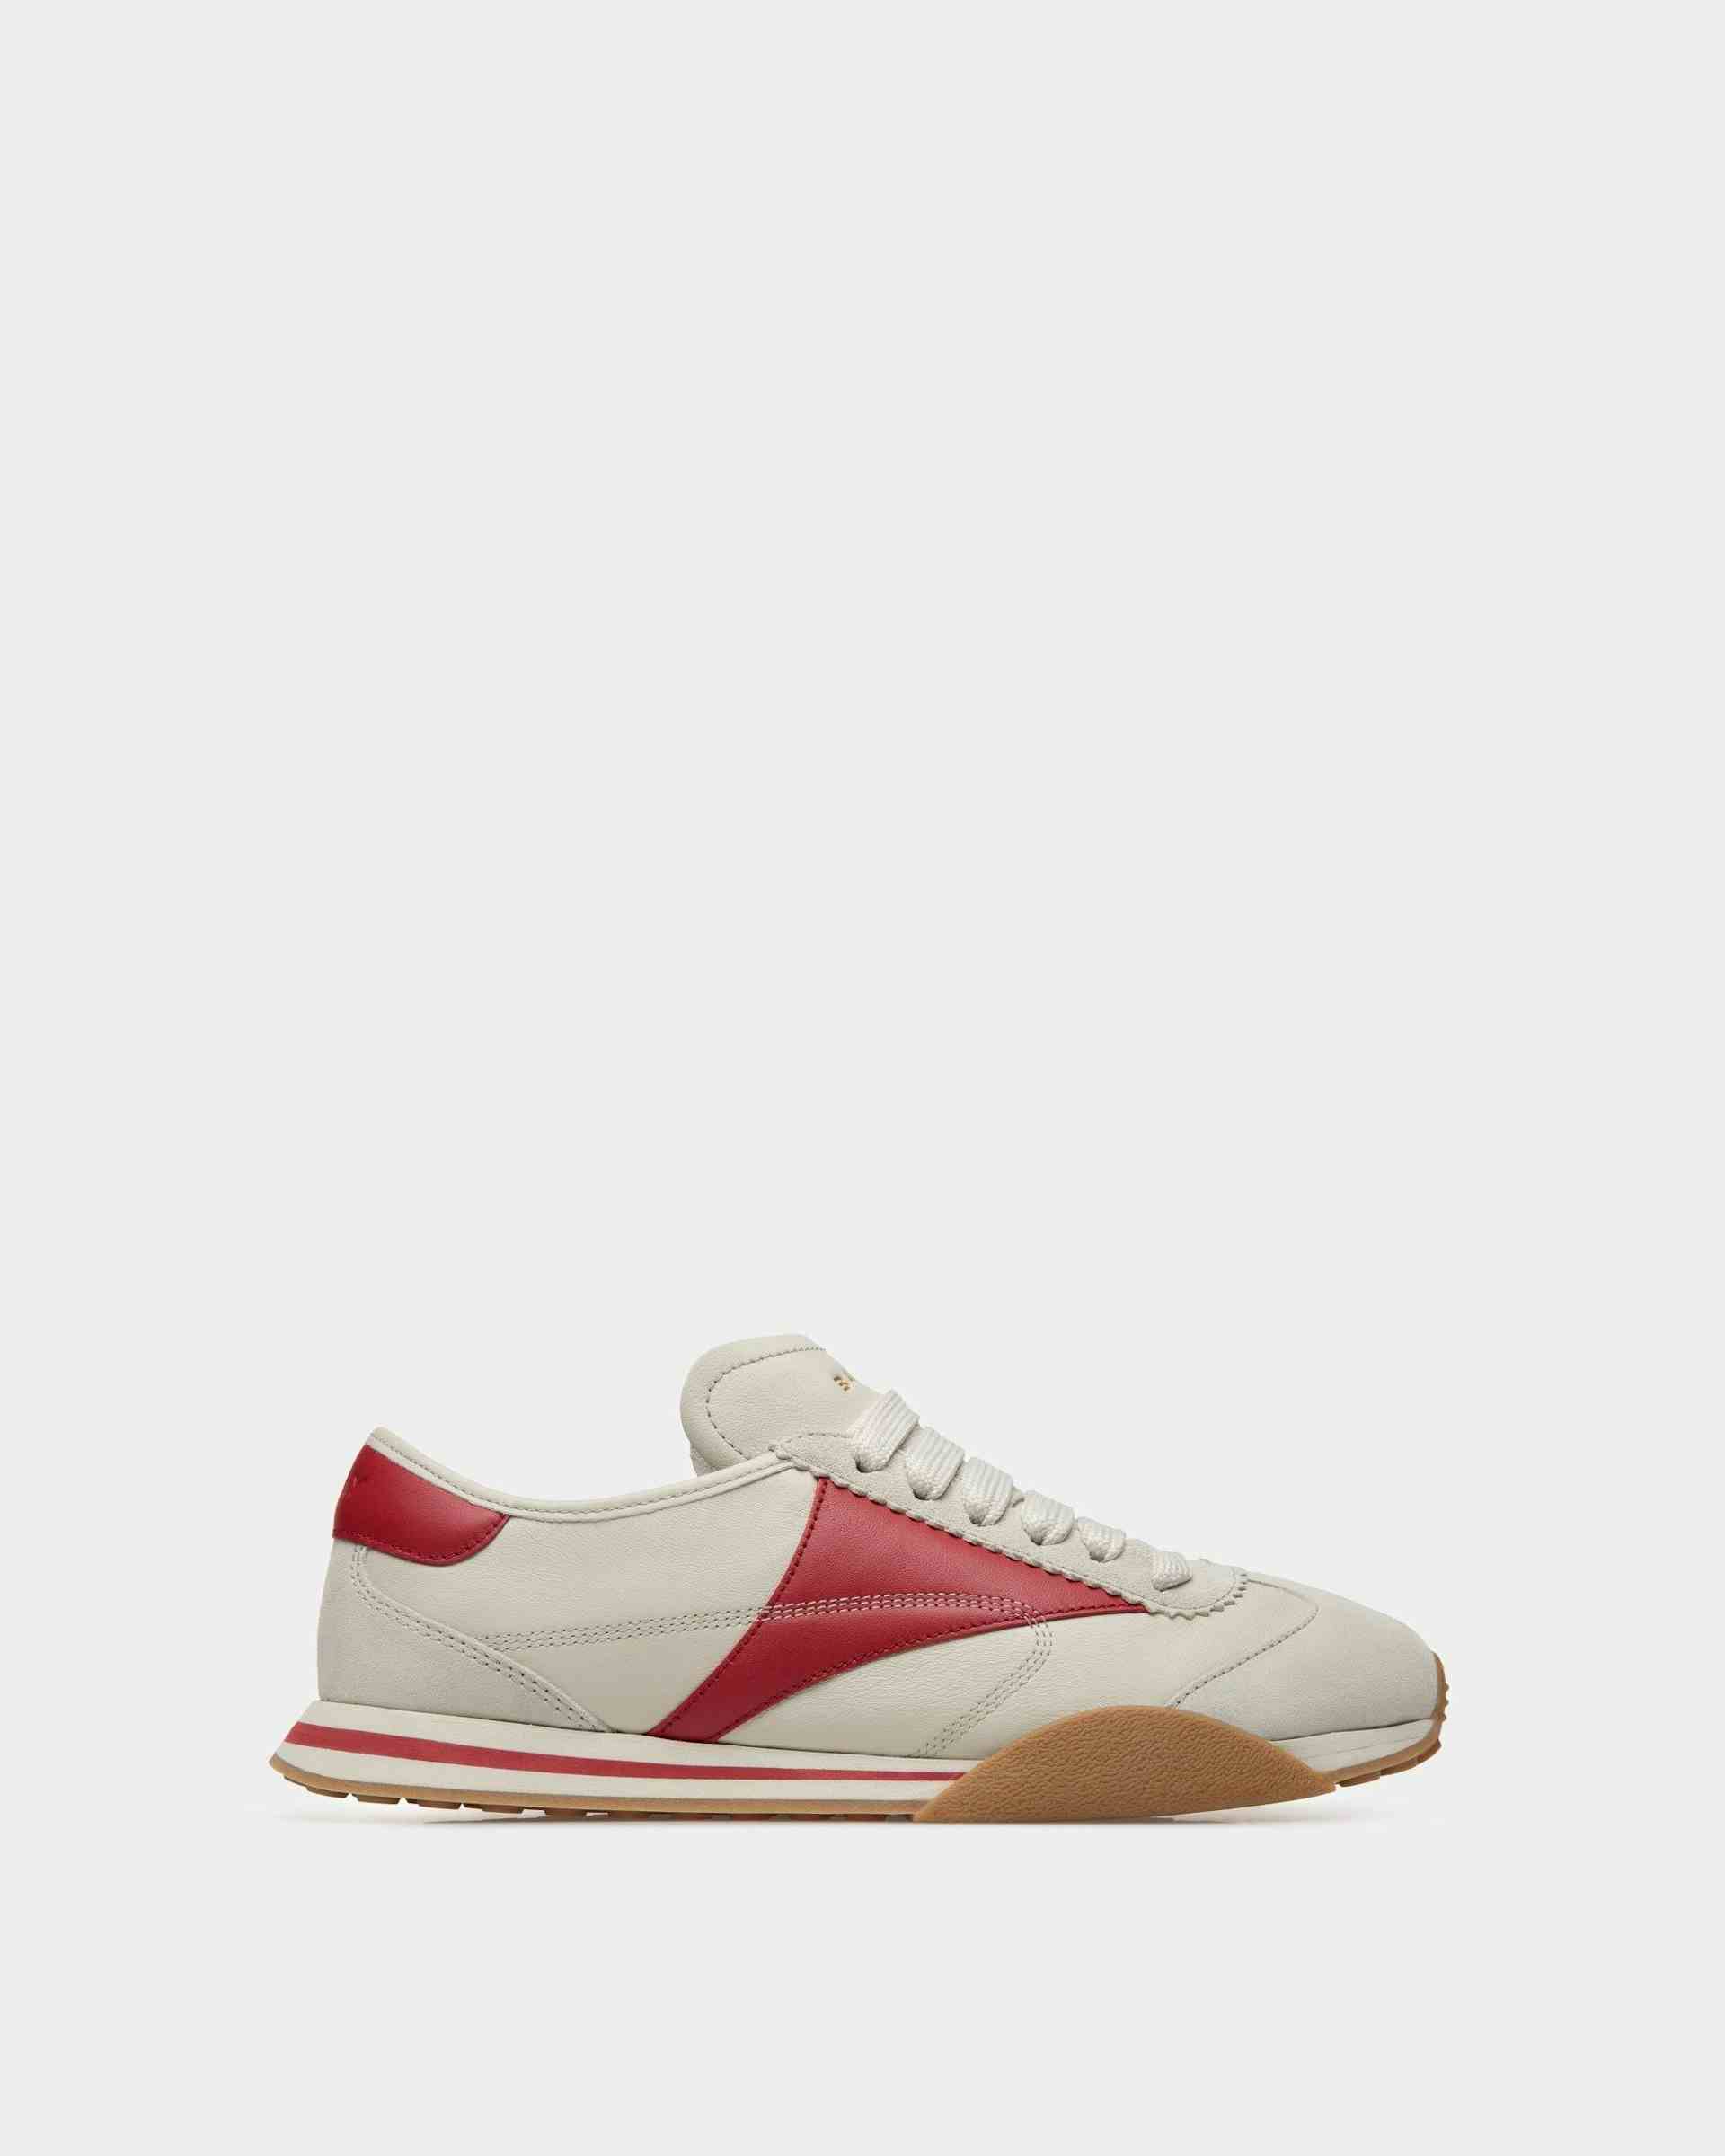 Sussex Sneakers In Dusty White And Deep Ruby Leather - Men's - Bally